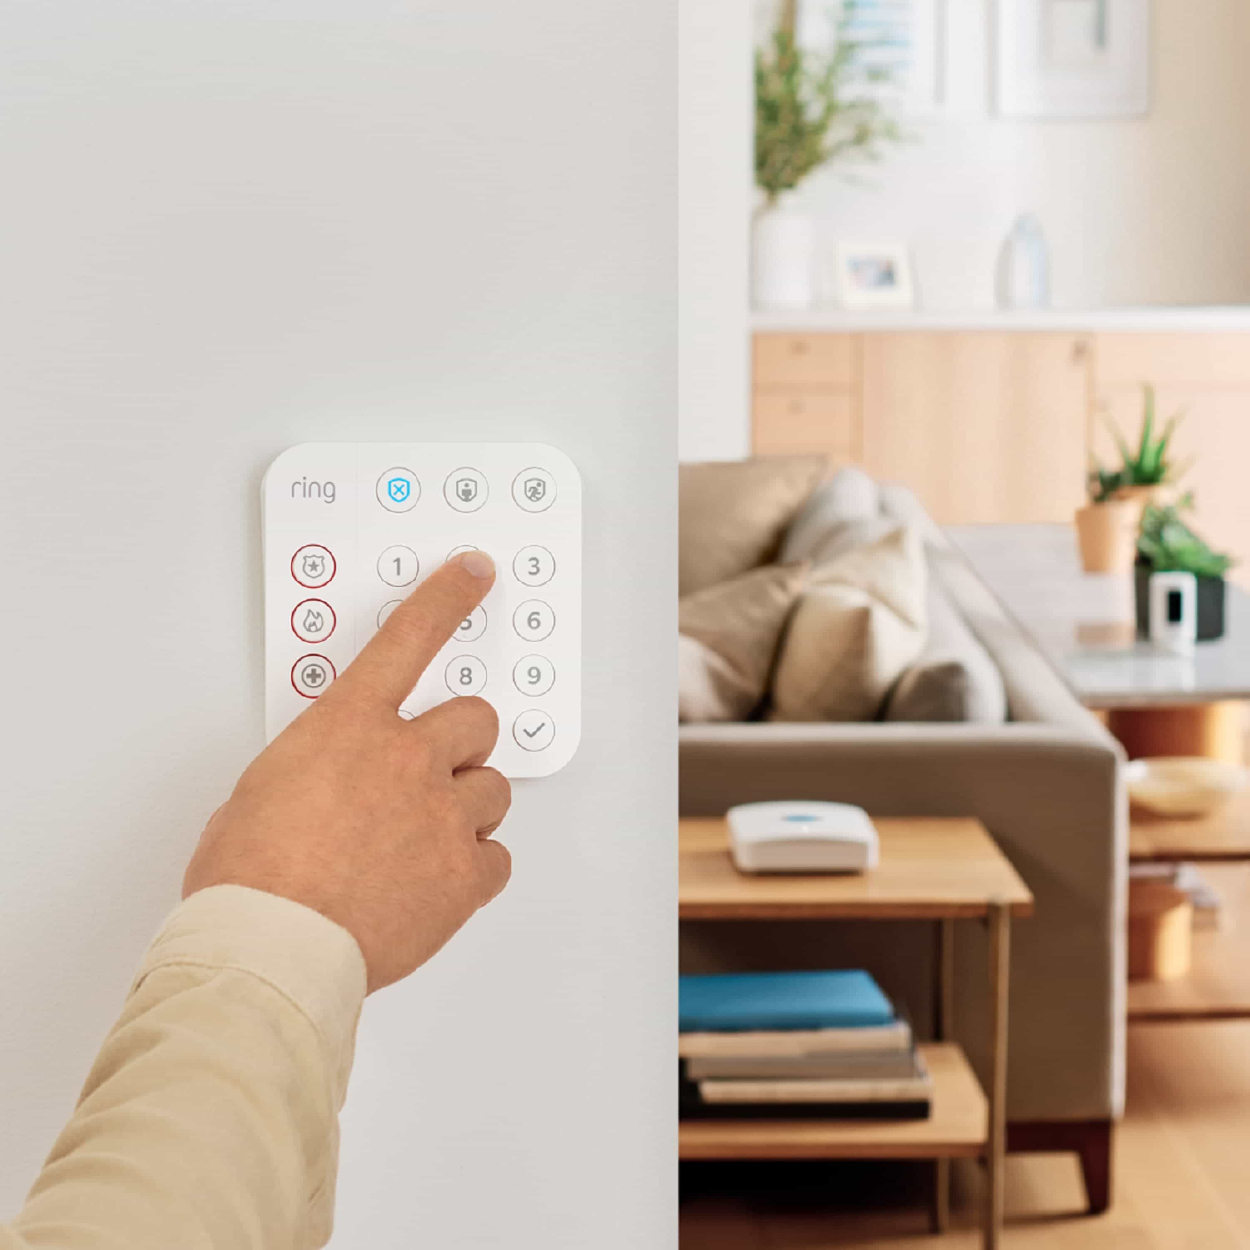 A hand is shown pressing buttons on a white security keypad. The keypad is on a light gray wall and past the wall a living room is shown in daylight.